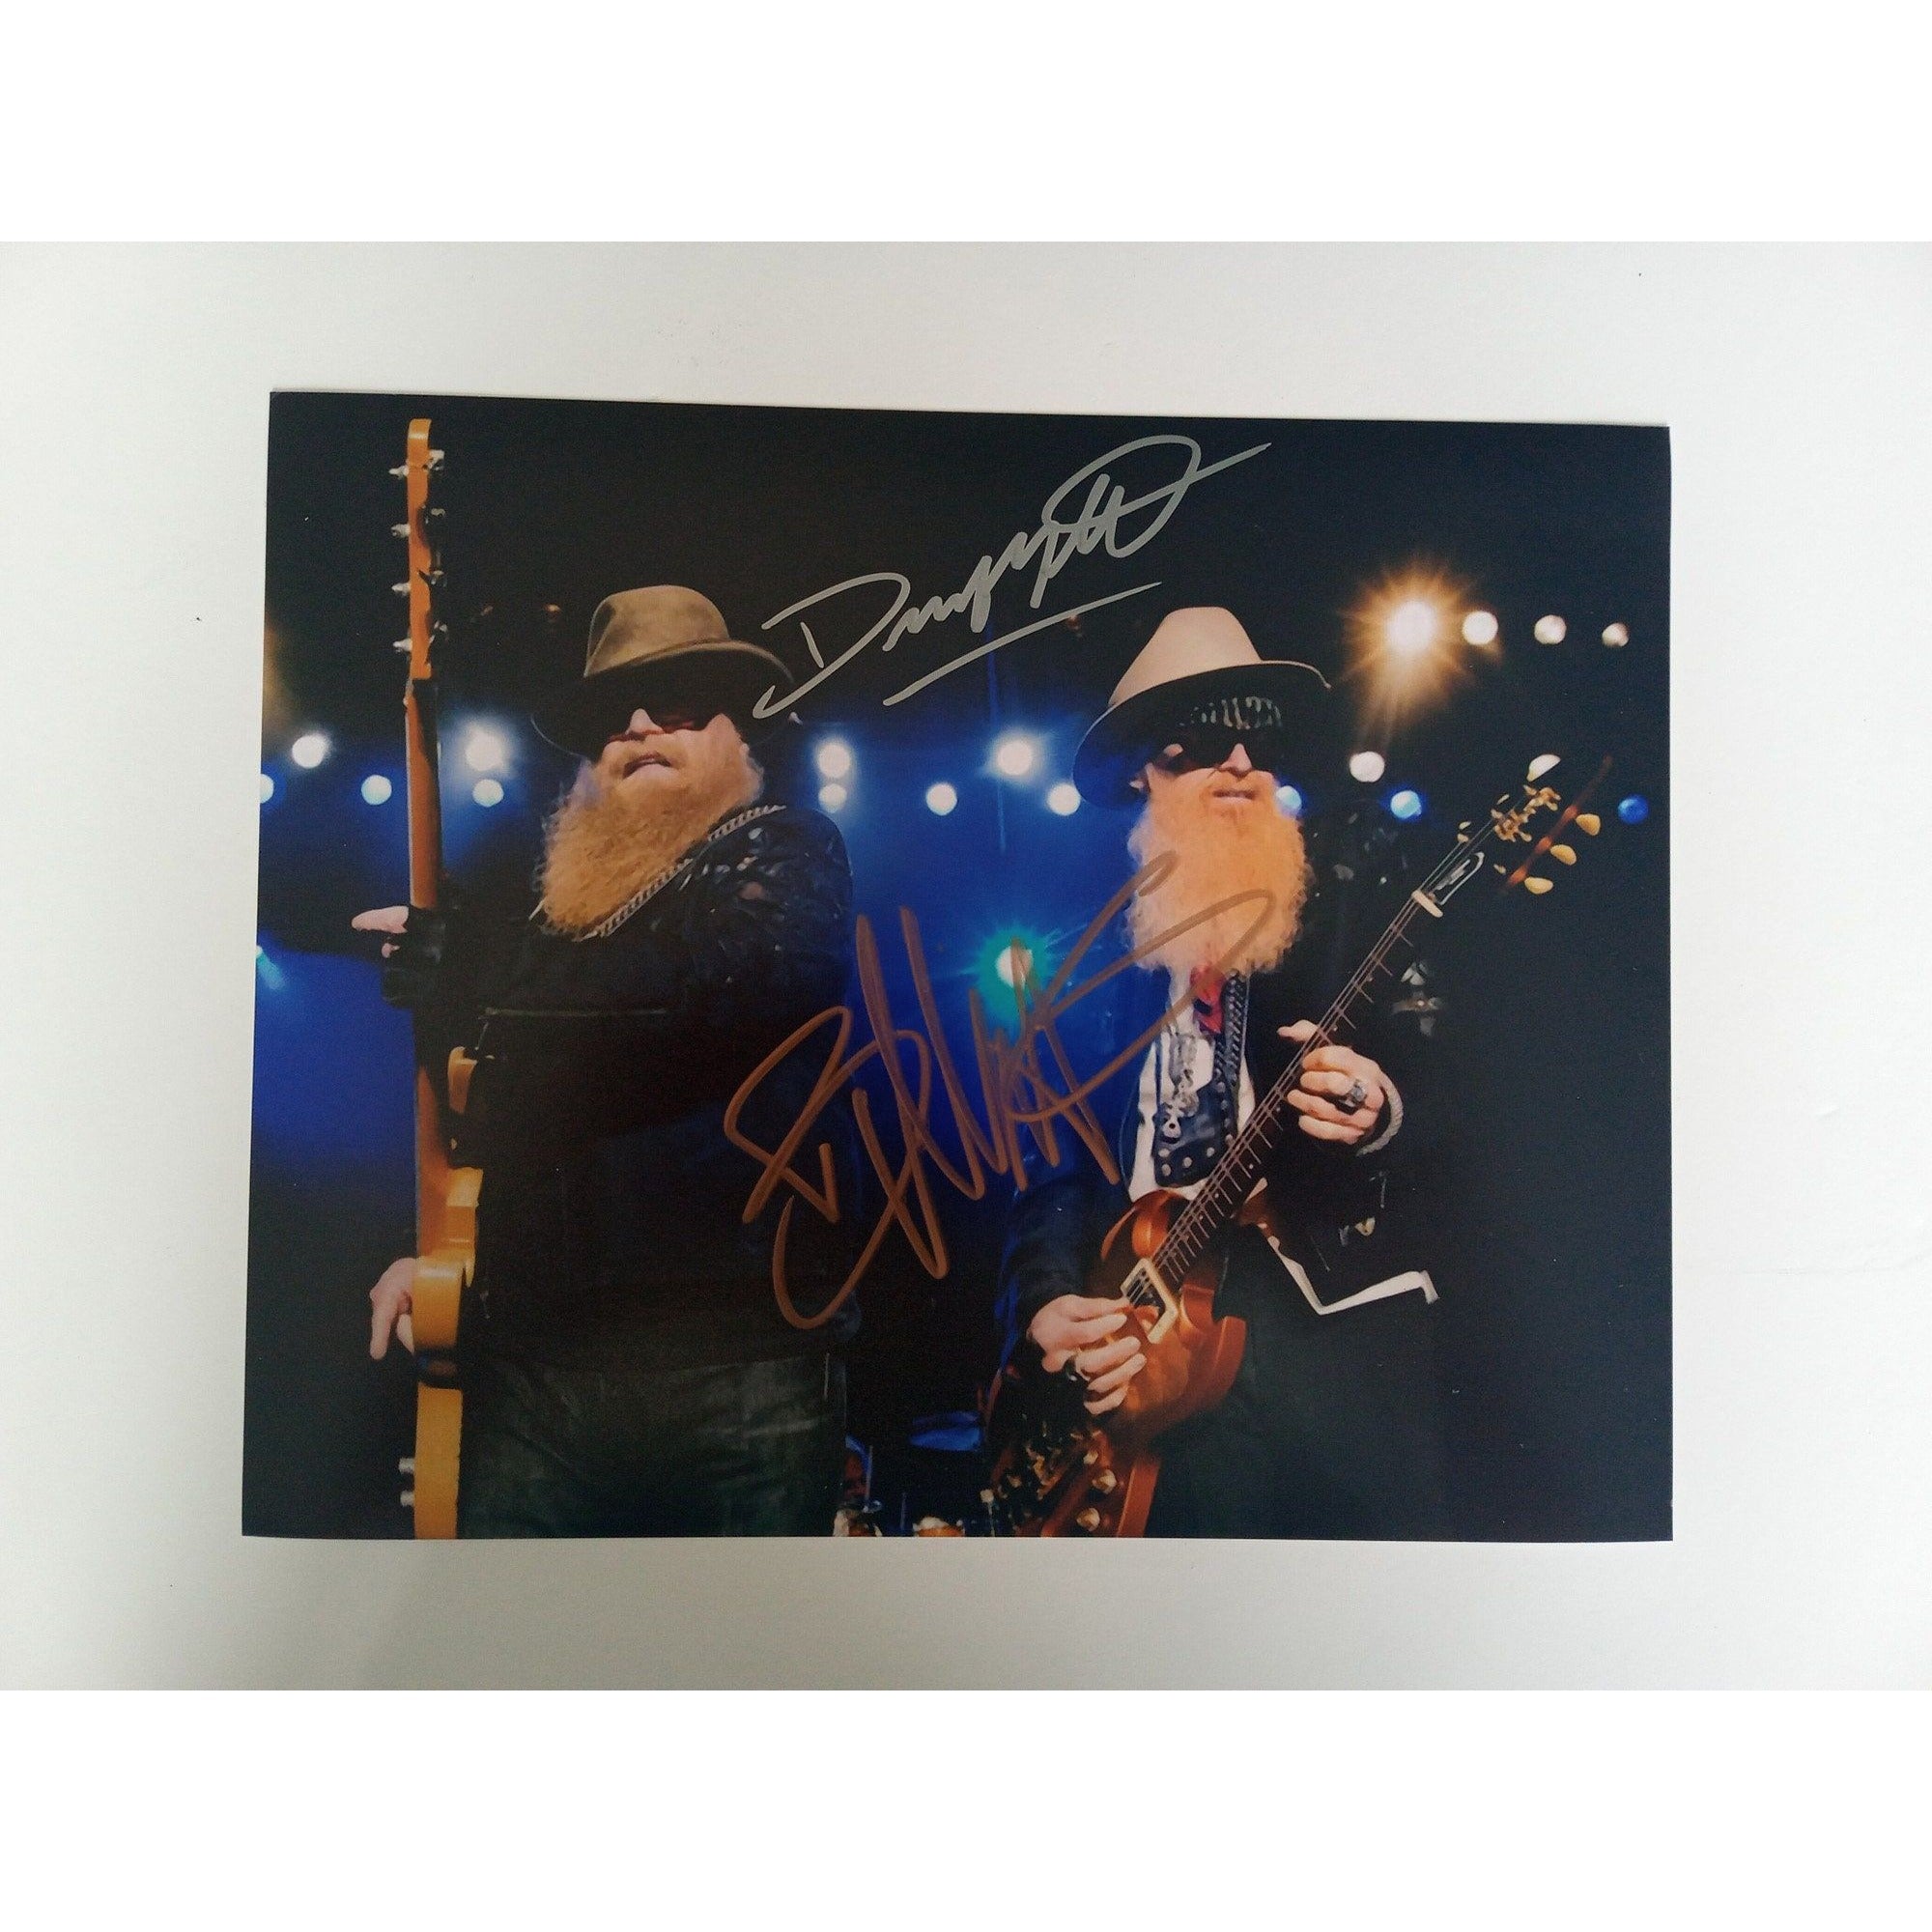 Billy Gibbons and Dusty Hill ZZ Top 8 by 10 signed photo with proof